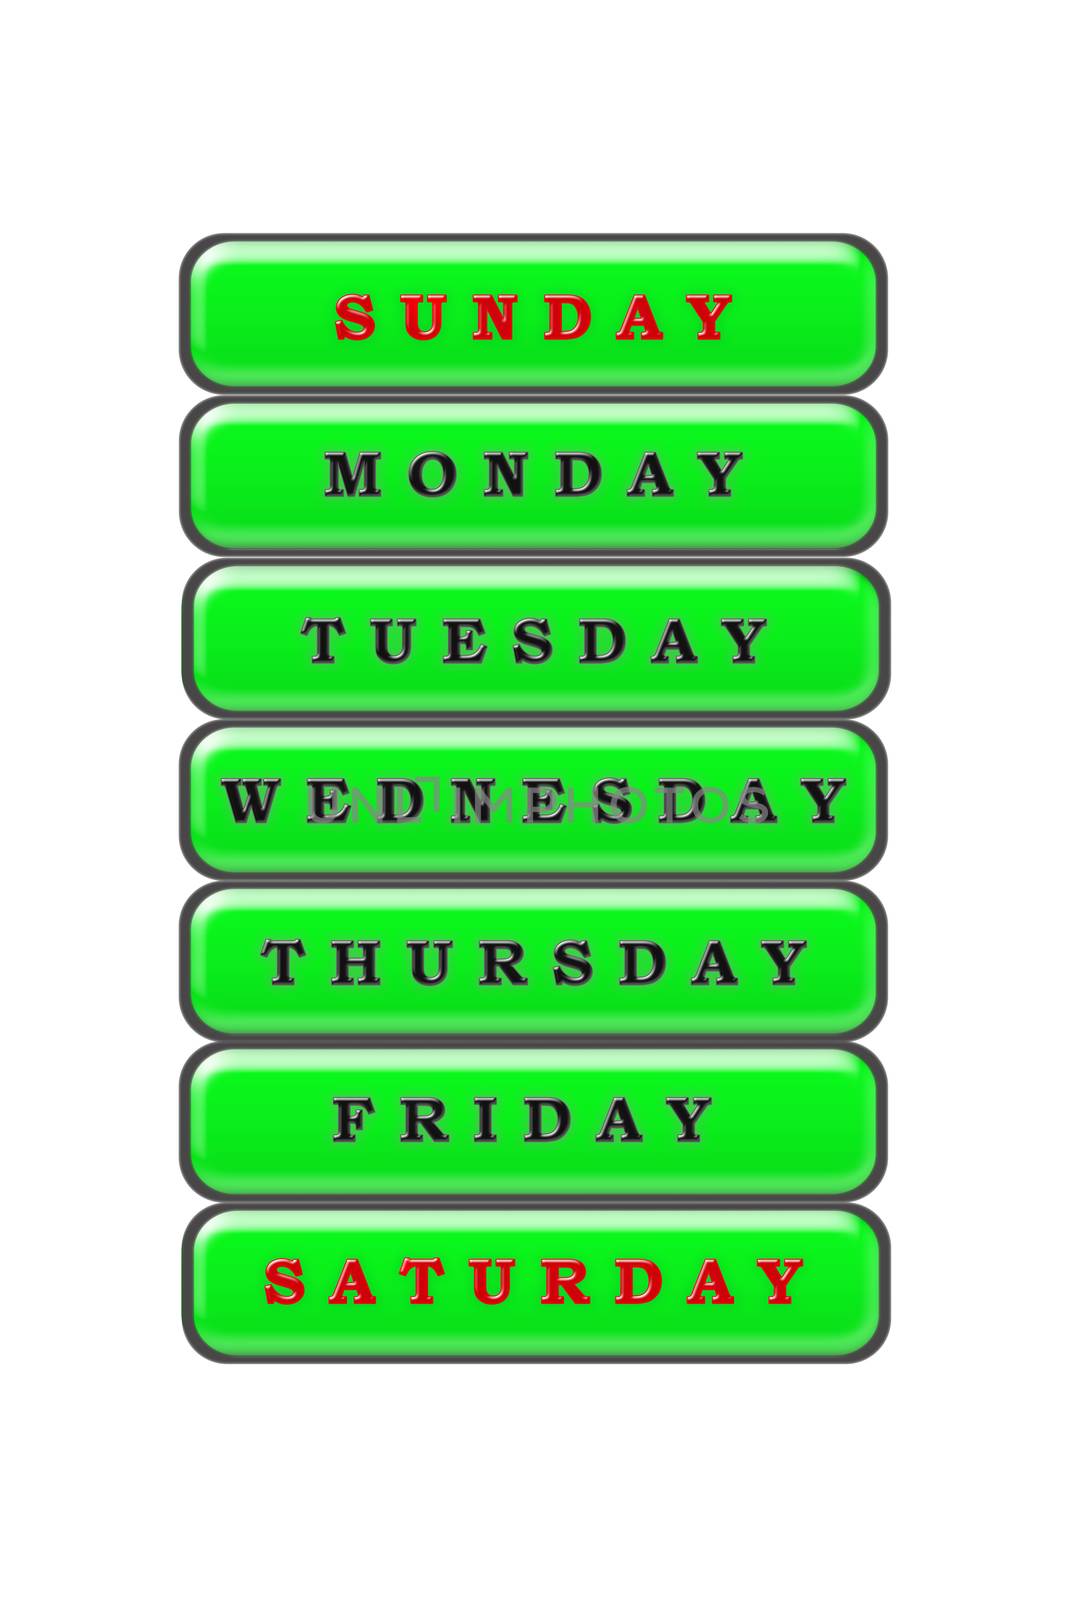 Among the list of days of the week on a green background, Sunday and Saturday are highlighted in red the rest of the days are highlighted in black.